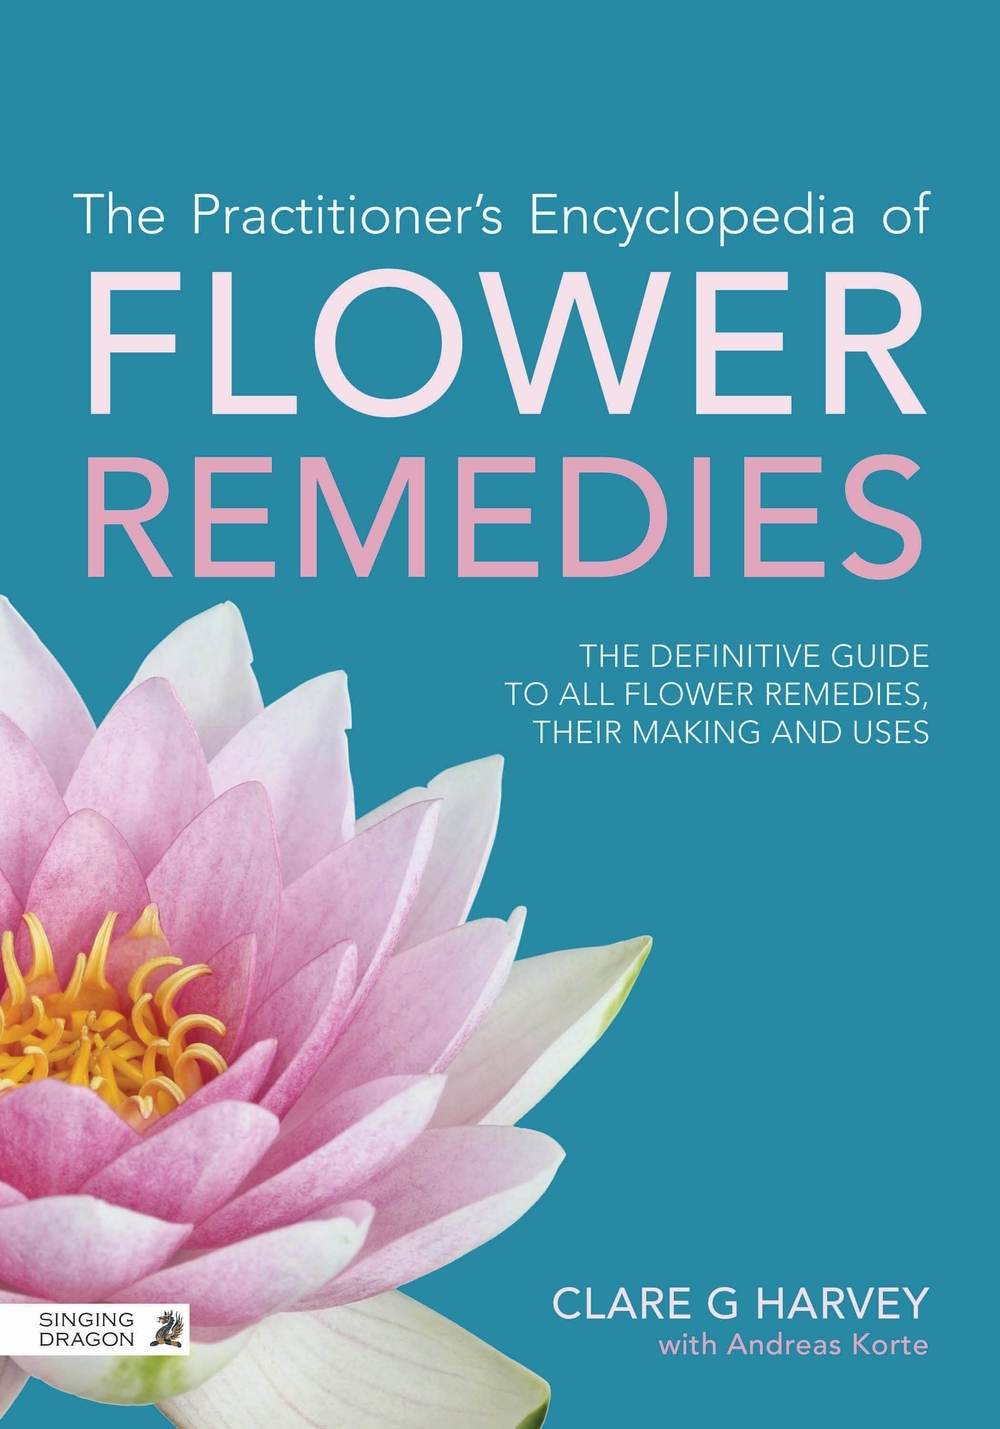 The Practitioner's Encyclopedia of Flower Remedies by Clare G Harvey, Richard Gerber